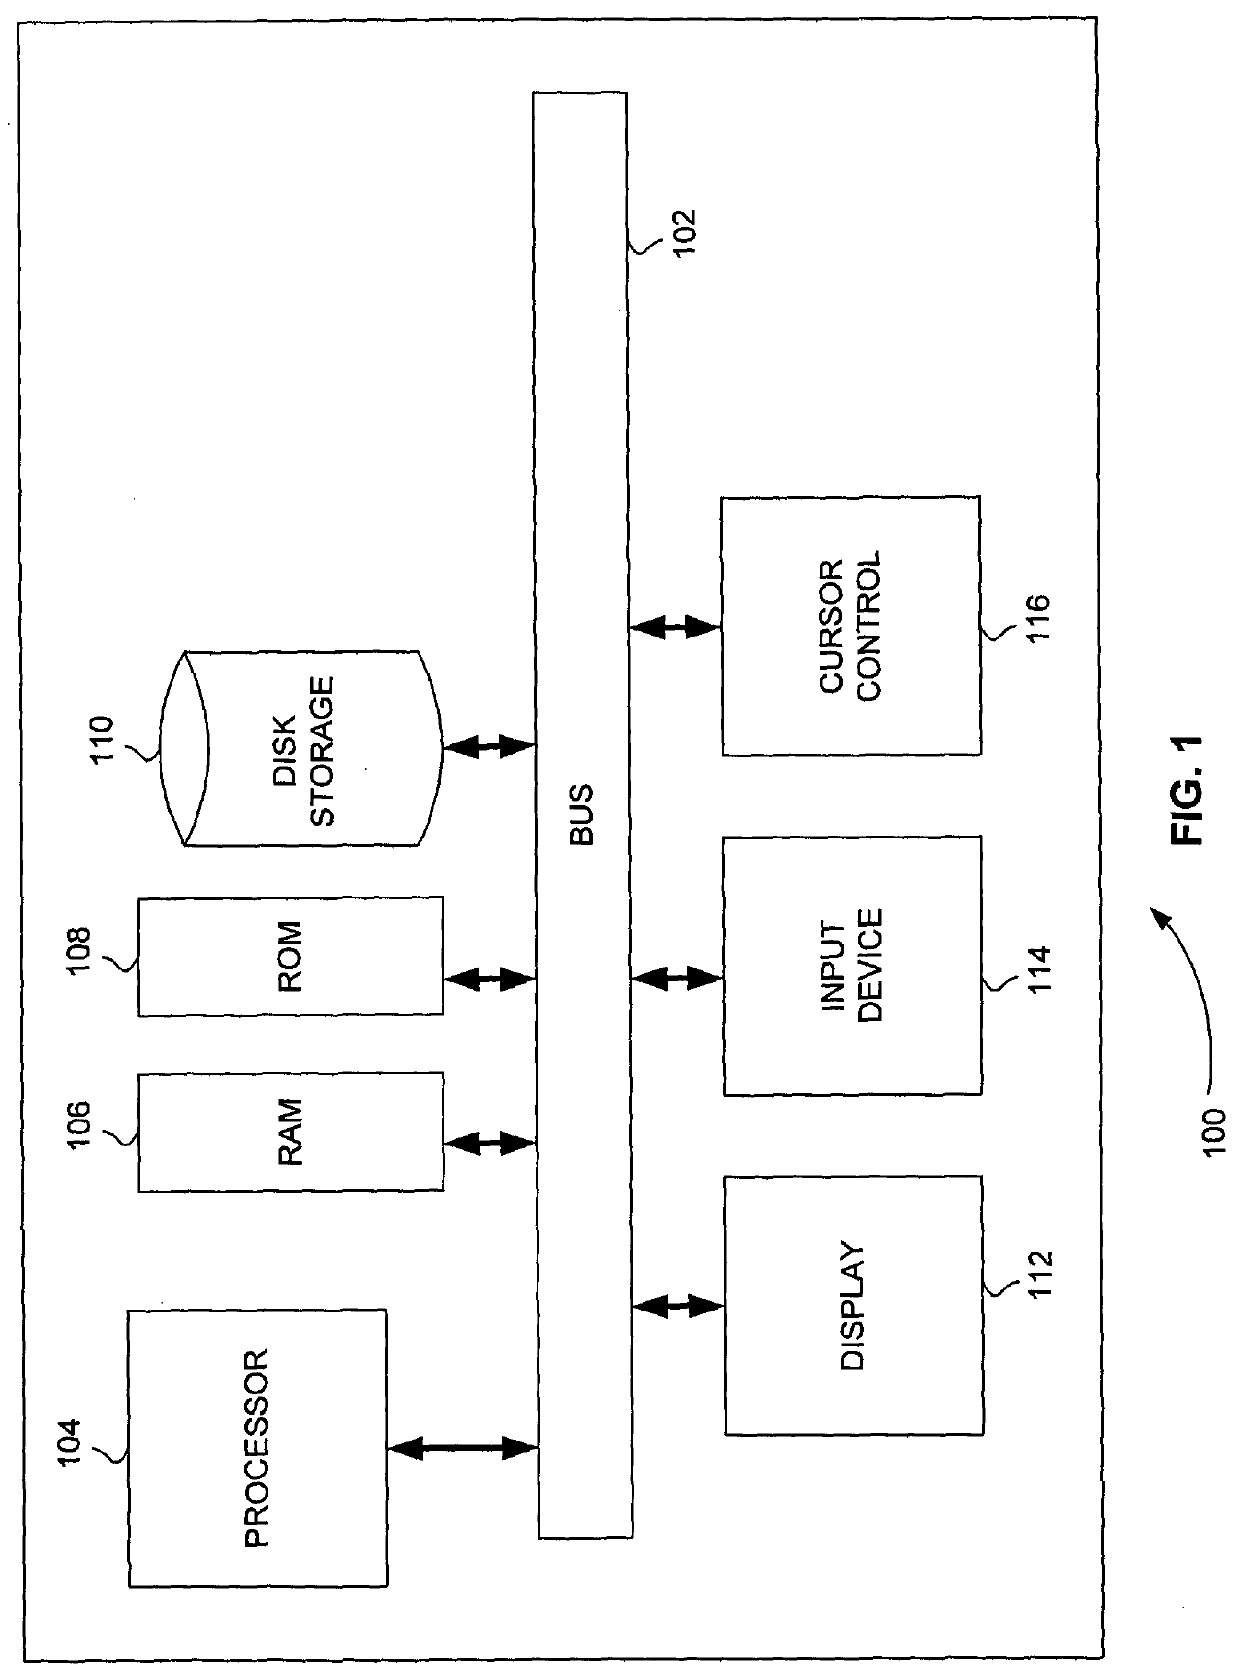 Use of windowed mass spectrometry data for retention time determination or confirmation